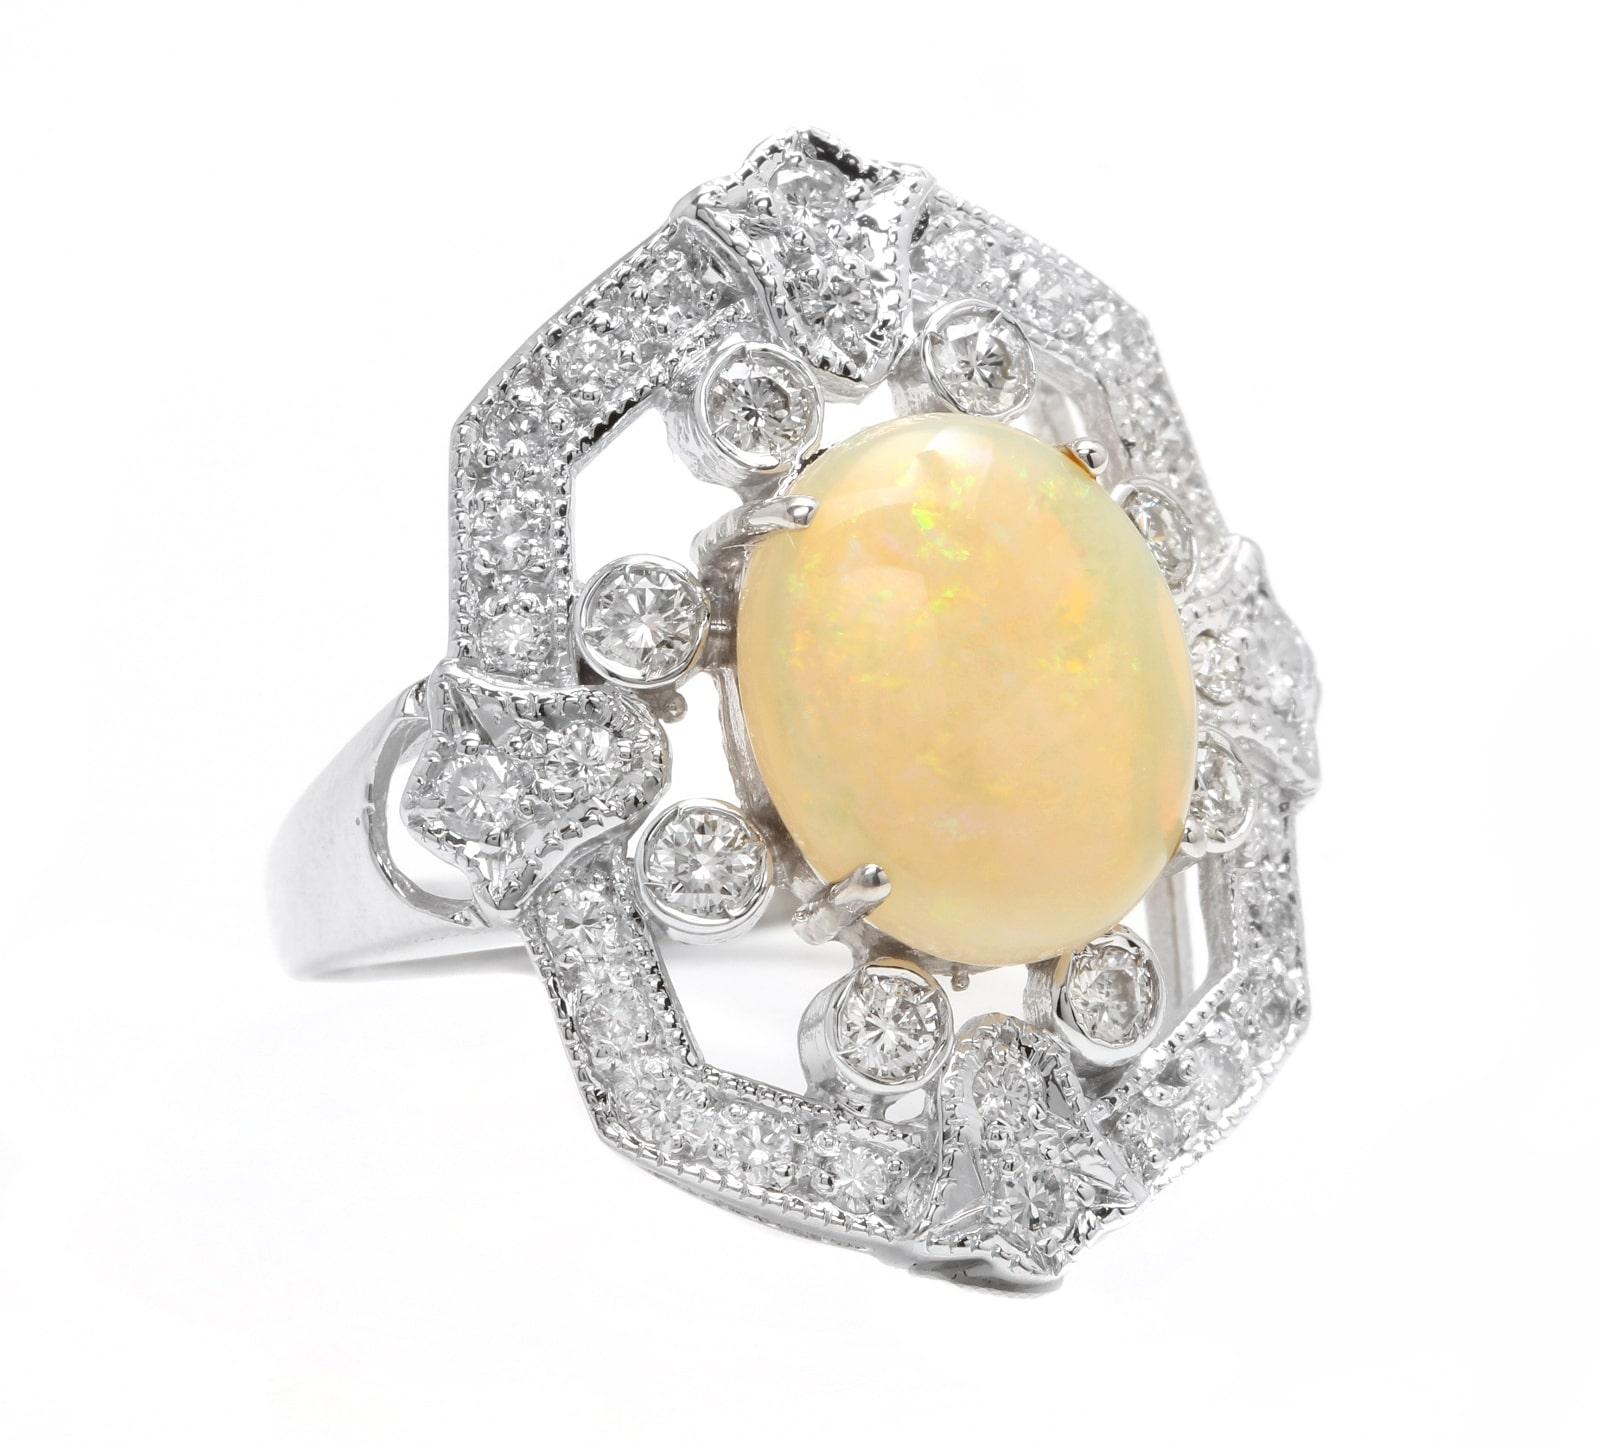 4.20 Carats Natural  Impressive Australian Opal and Diamond 14K Solid White Gold Ring

Suggested Replacement Value: $6,300.00

Total Natural Opal Weight is: Approx. 3.00 Carats 

Opal Measures: Approx. 12.00 x 10.00mm

Total Natural Round Diamonds